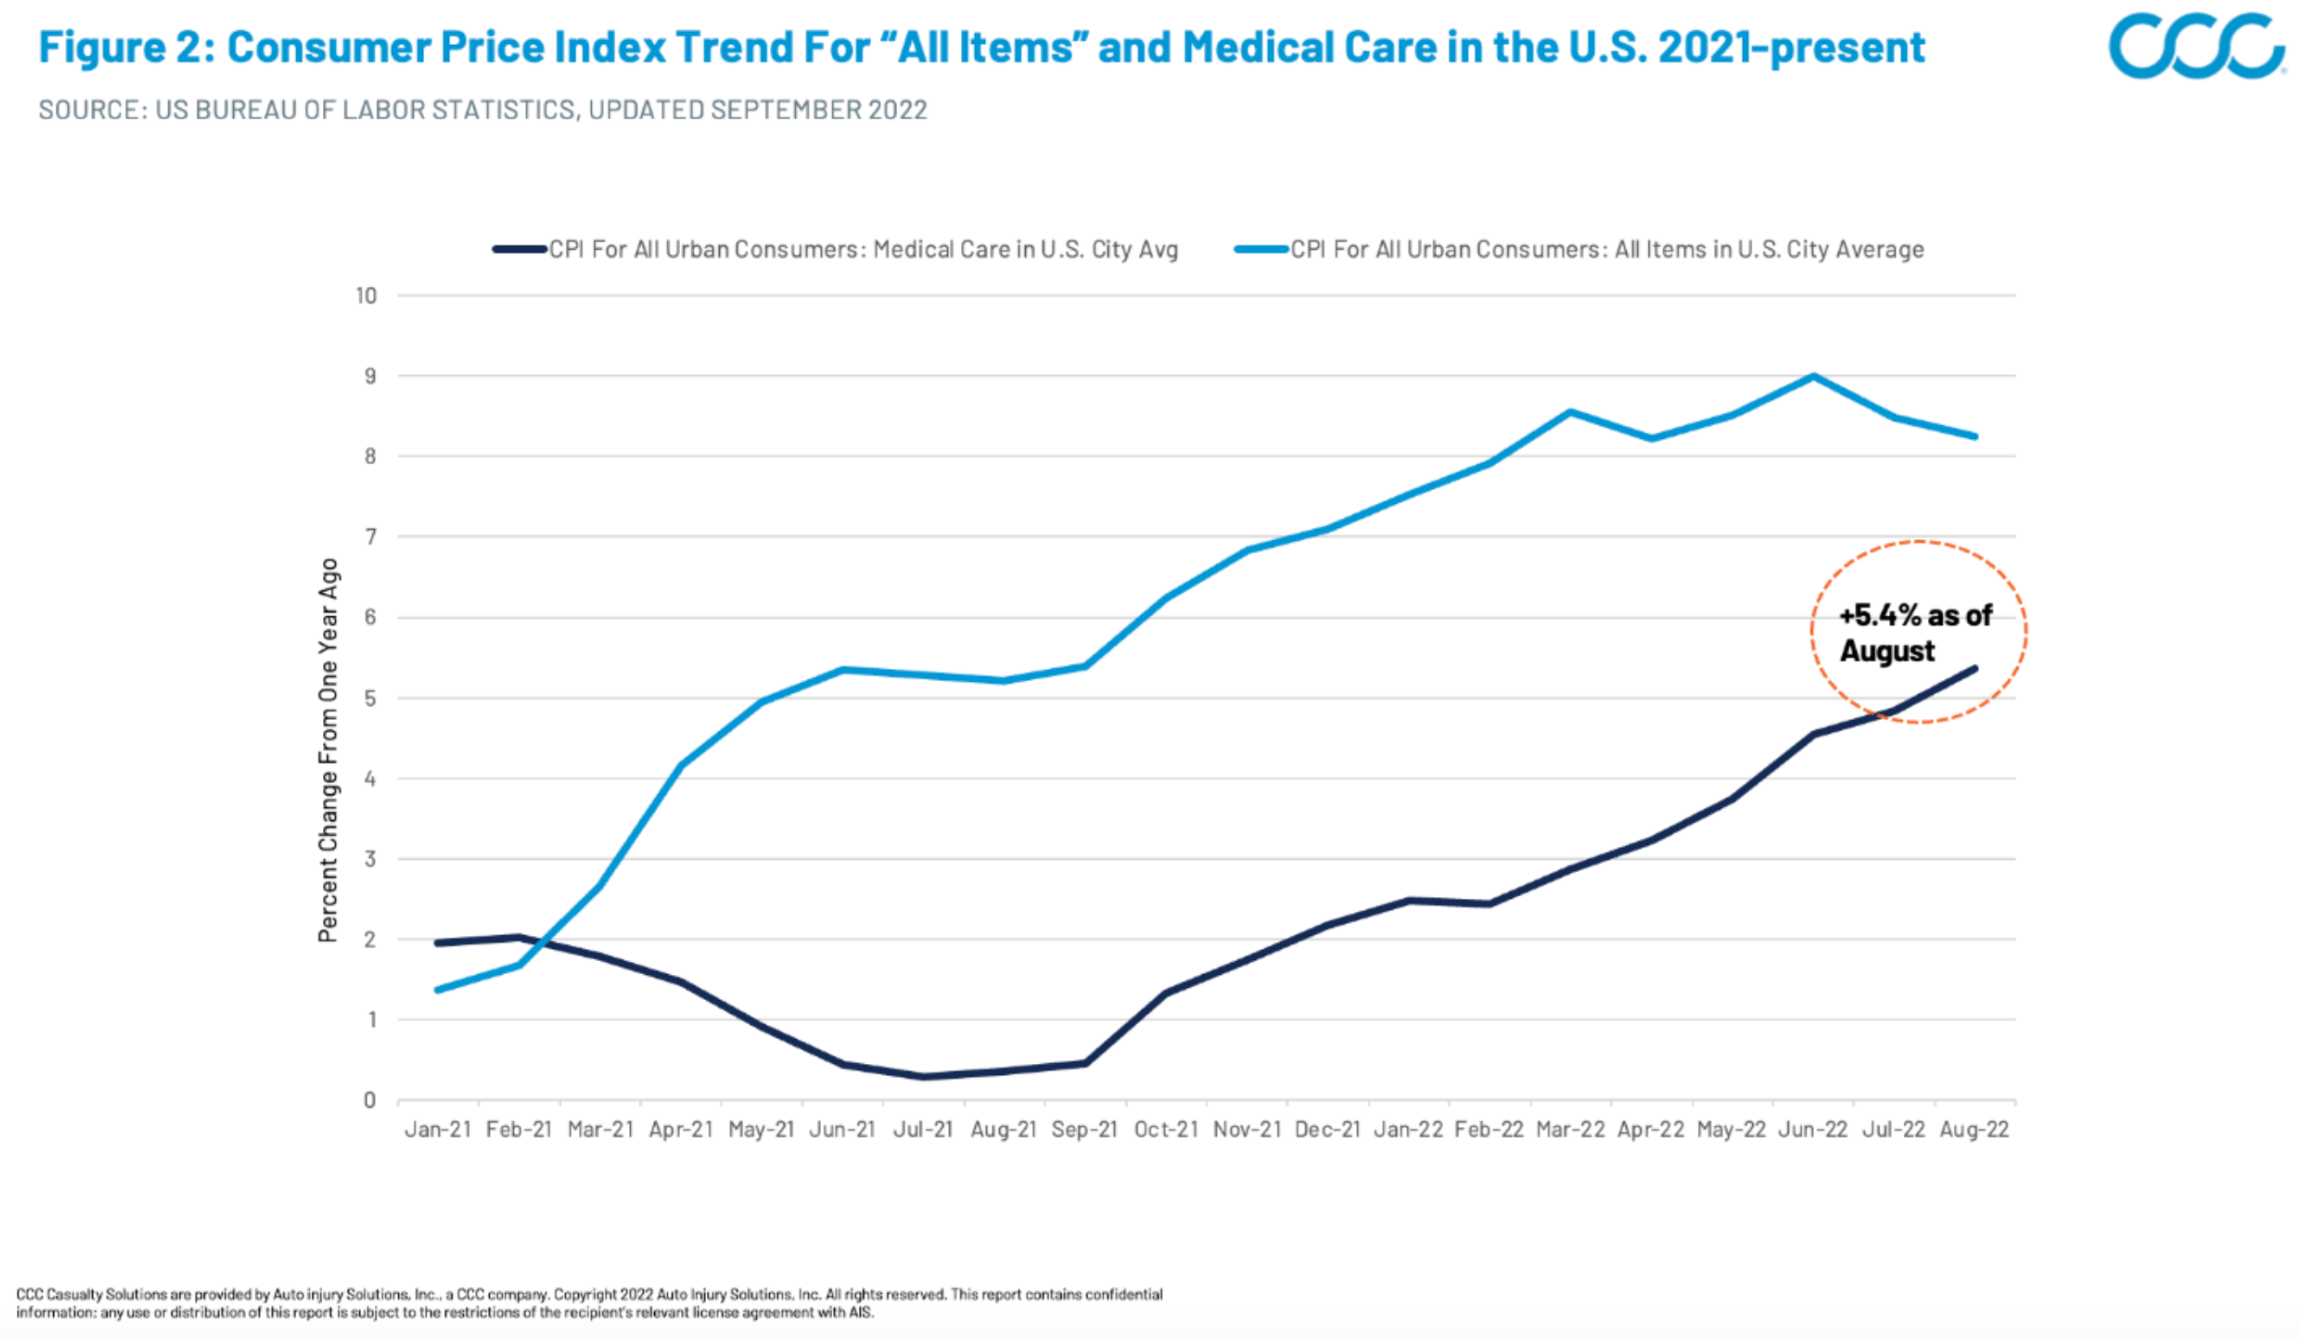 Consumer Price Index Trend for All Items and Medical Care Jan 2021 - Present